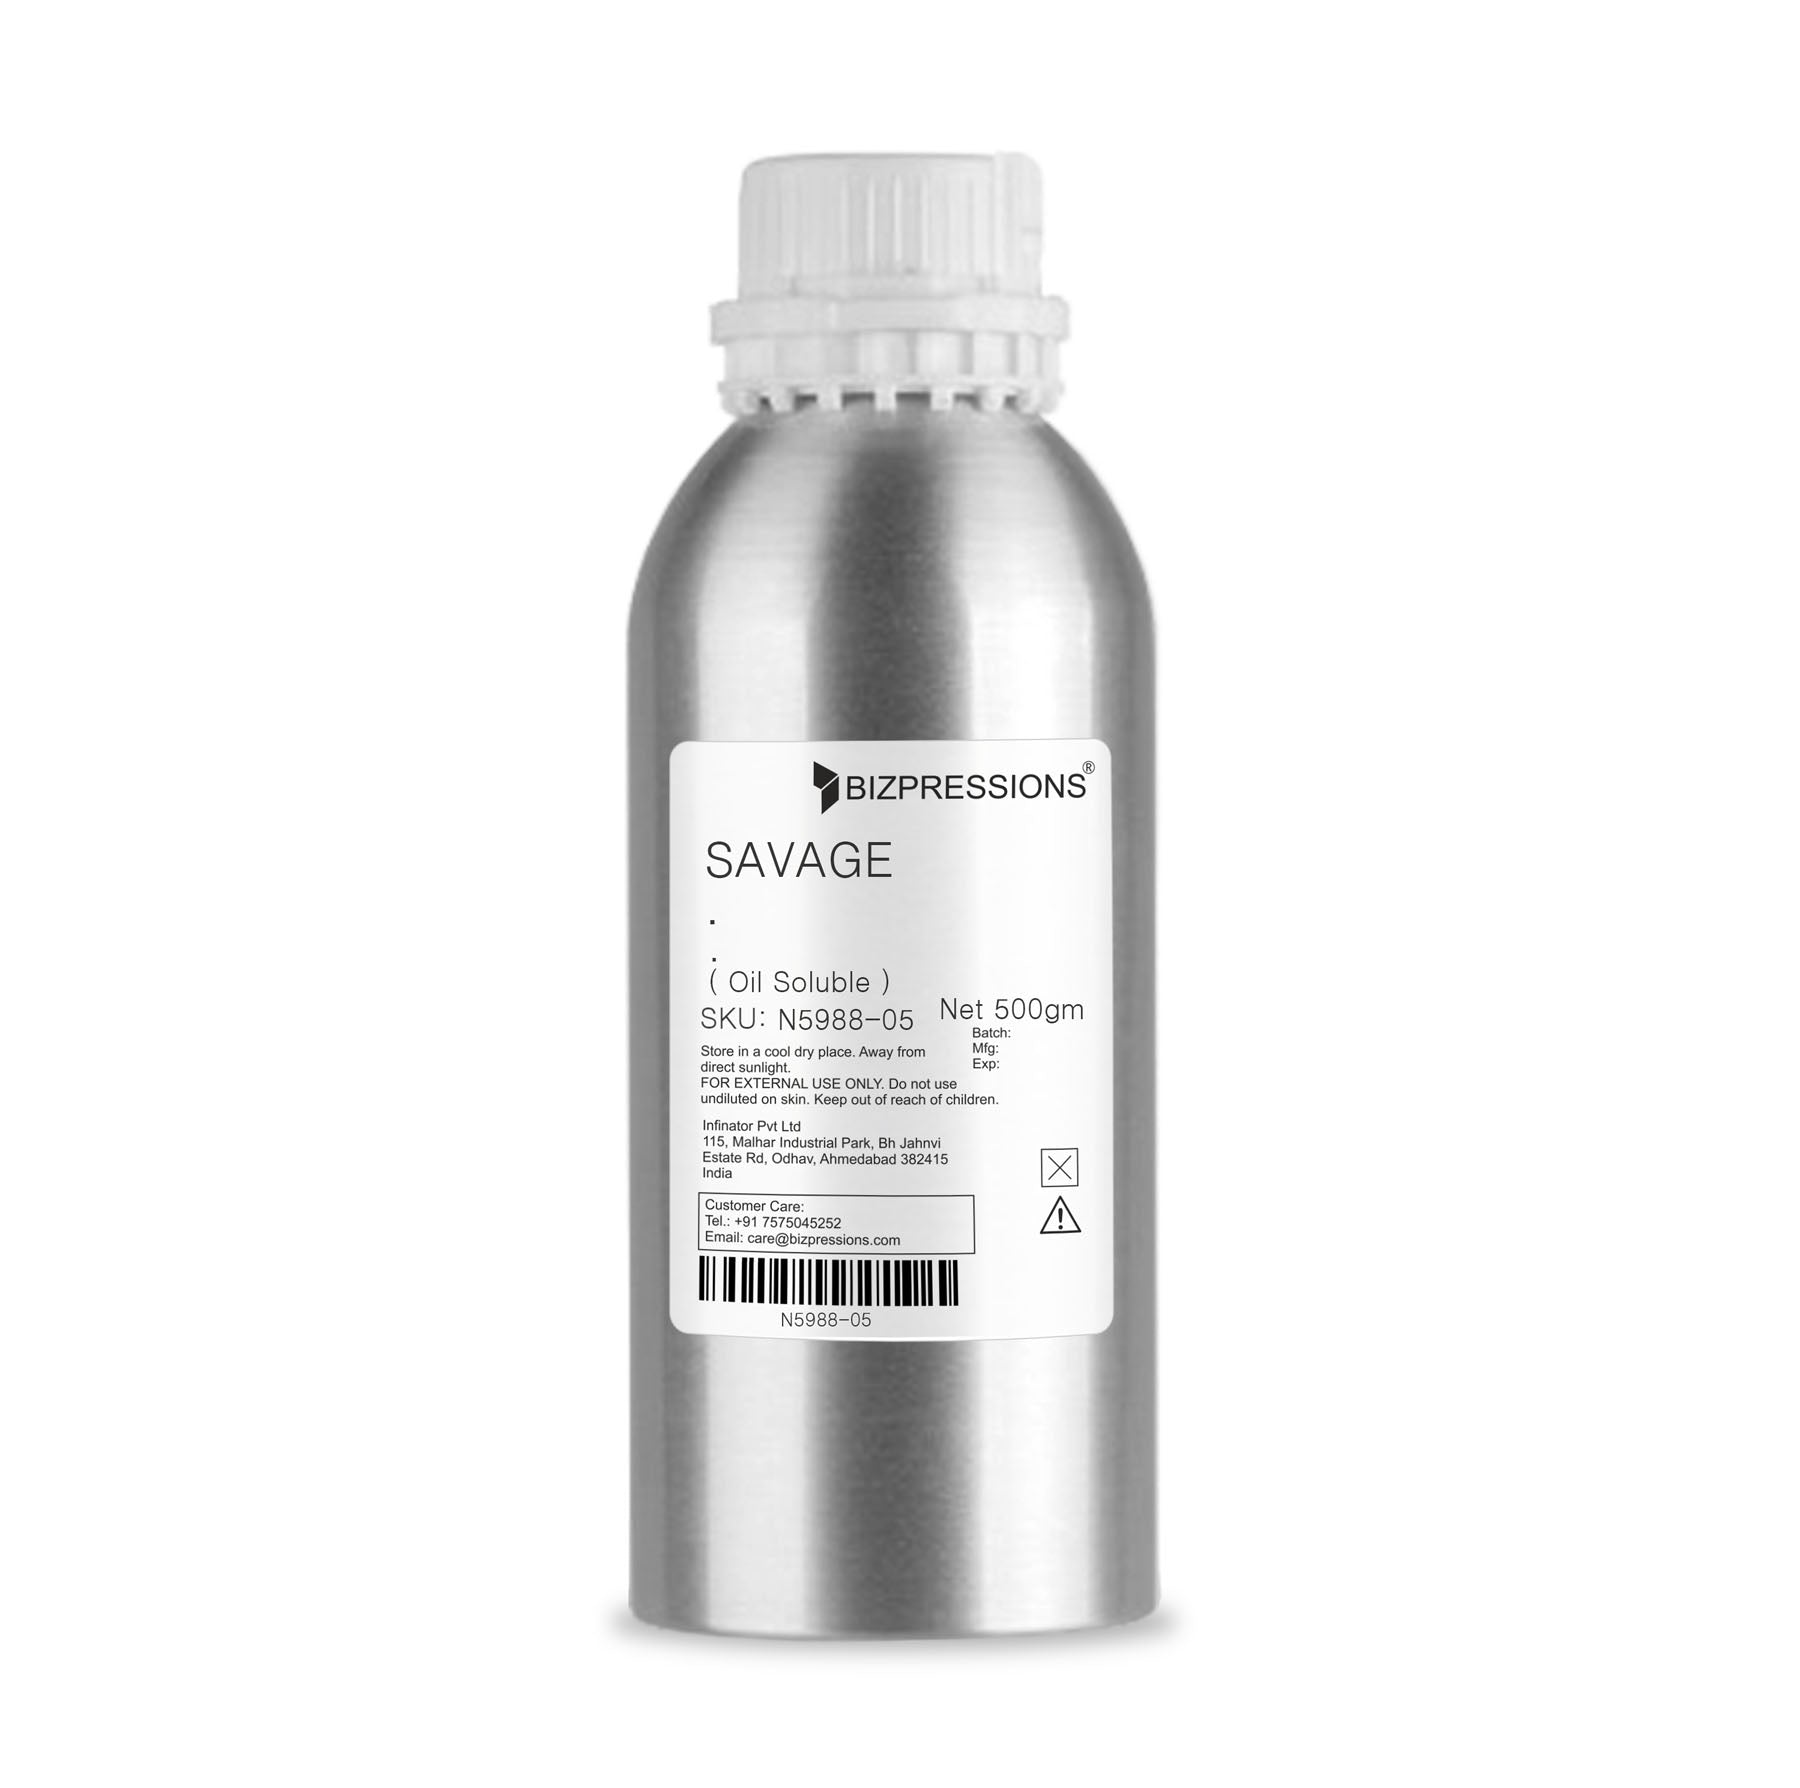 SAVAGE - Fragrance ( Oil Soluble ) - 500 gm